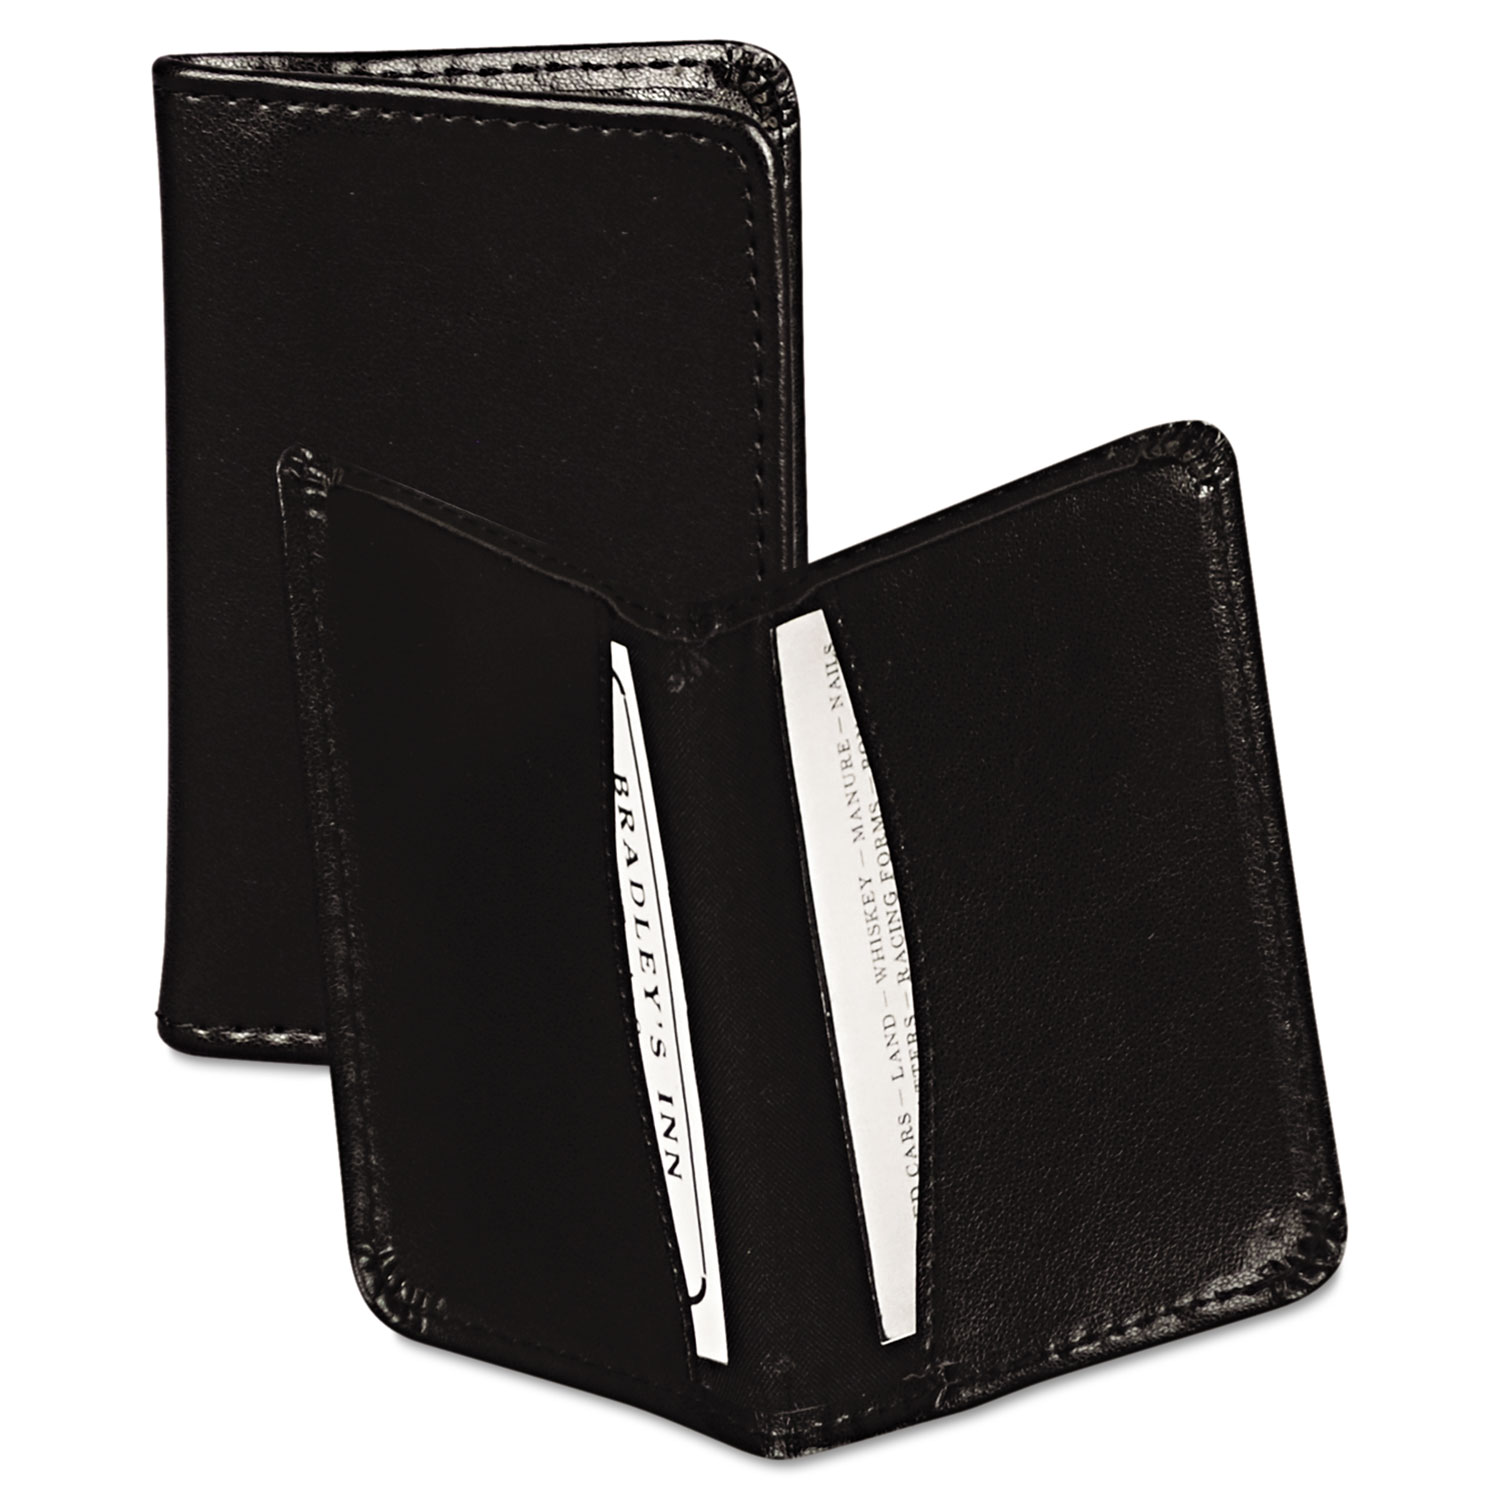 Regal Leather Business Card Wallet, 25 Card Cap, 2 x 3 1/2 Cards, Black